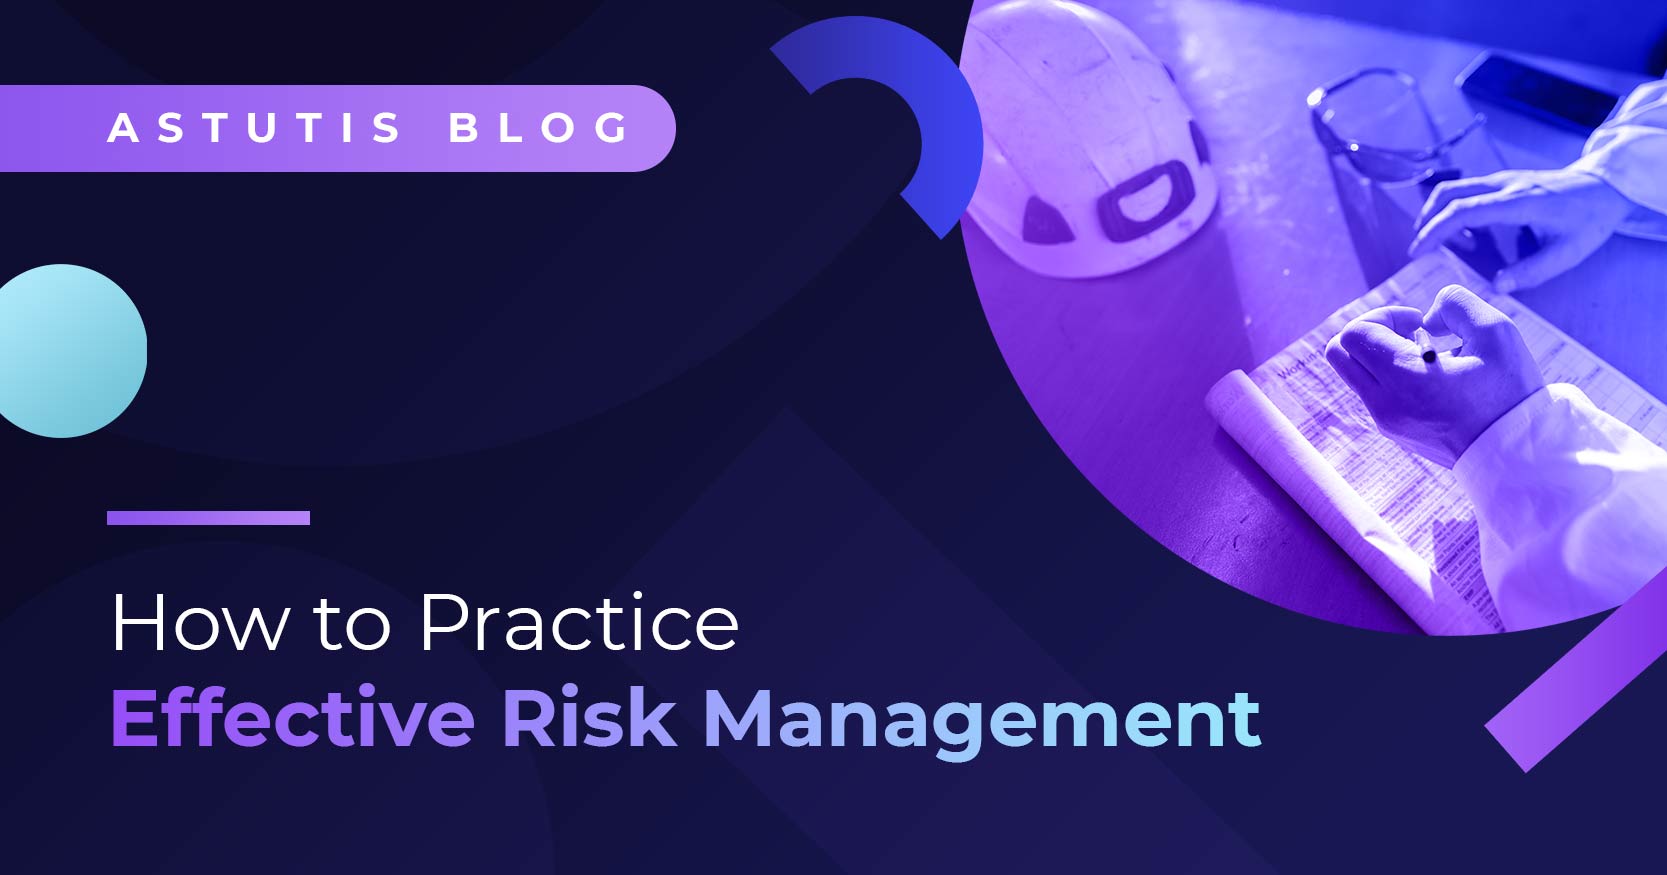 How To Practice Effective Risk Management Image